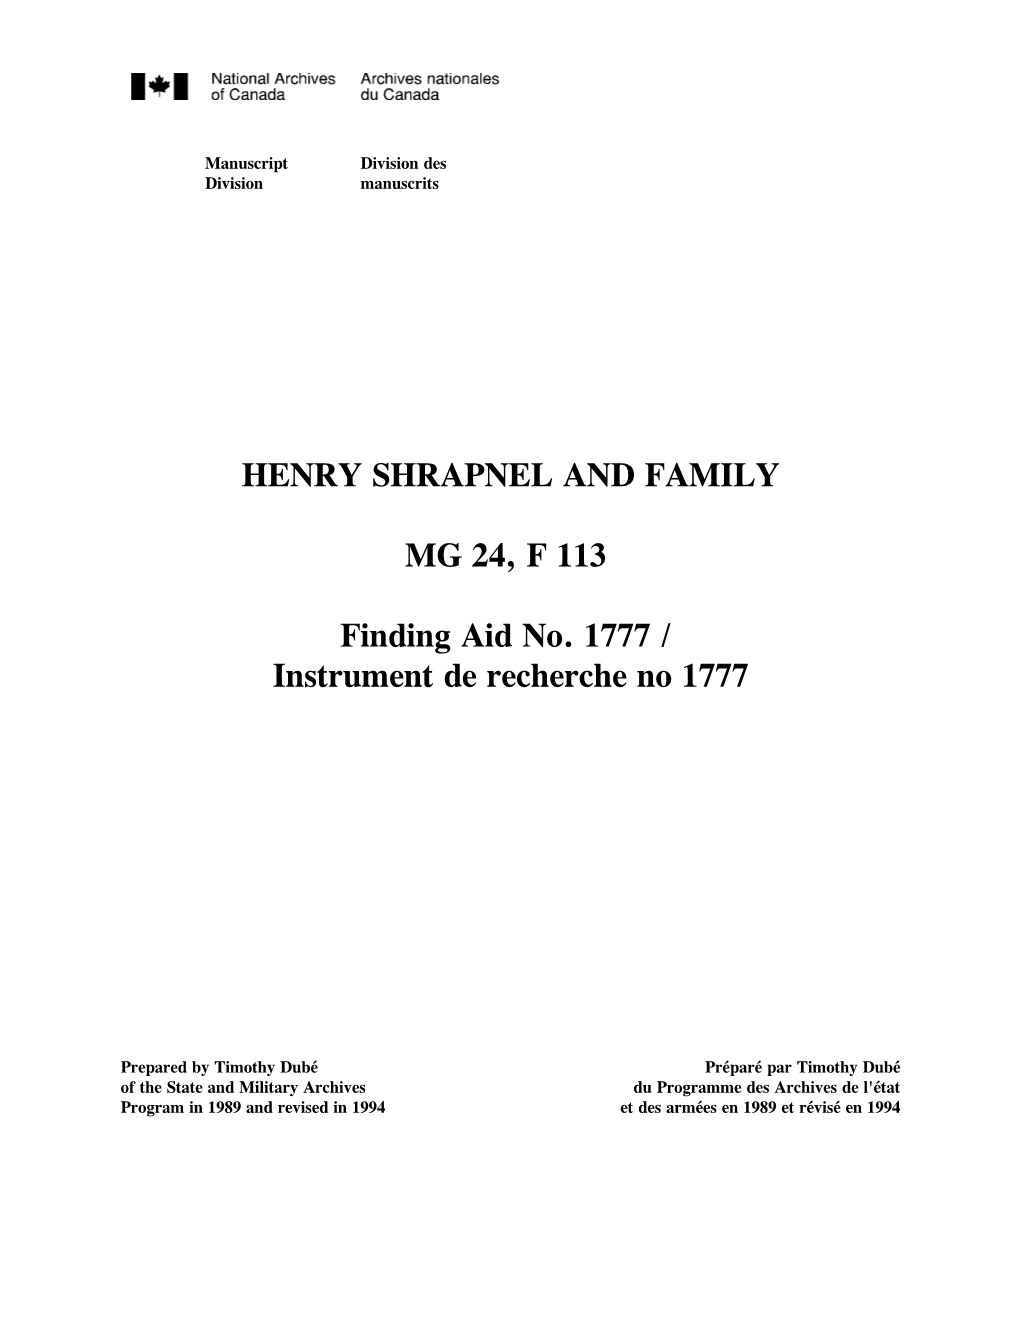 HENRY SHRAPNEL and FAMILY MG 24, F 113 Finding Aid No. 1777